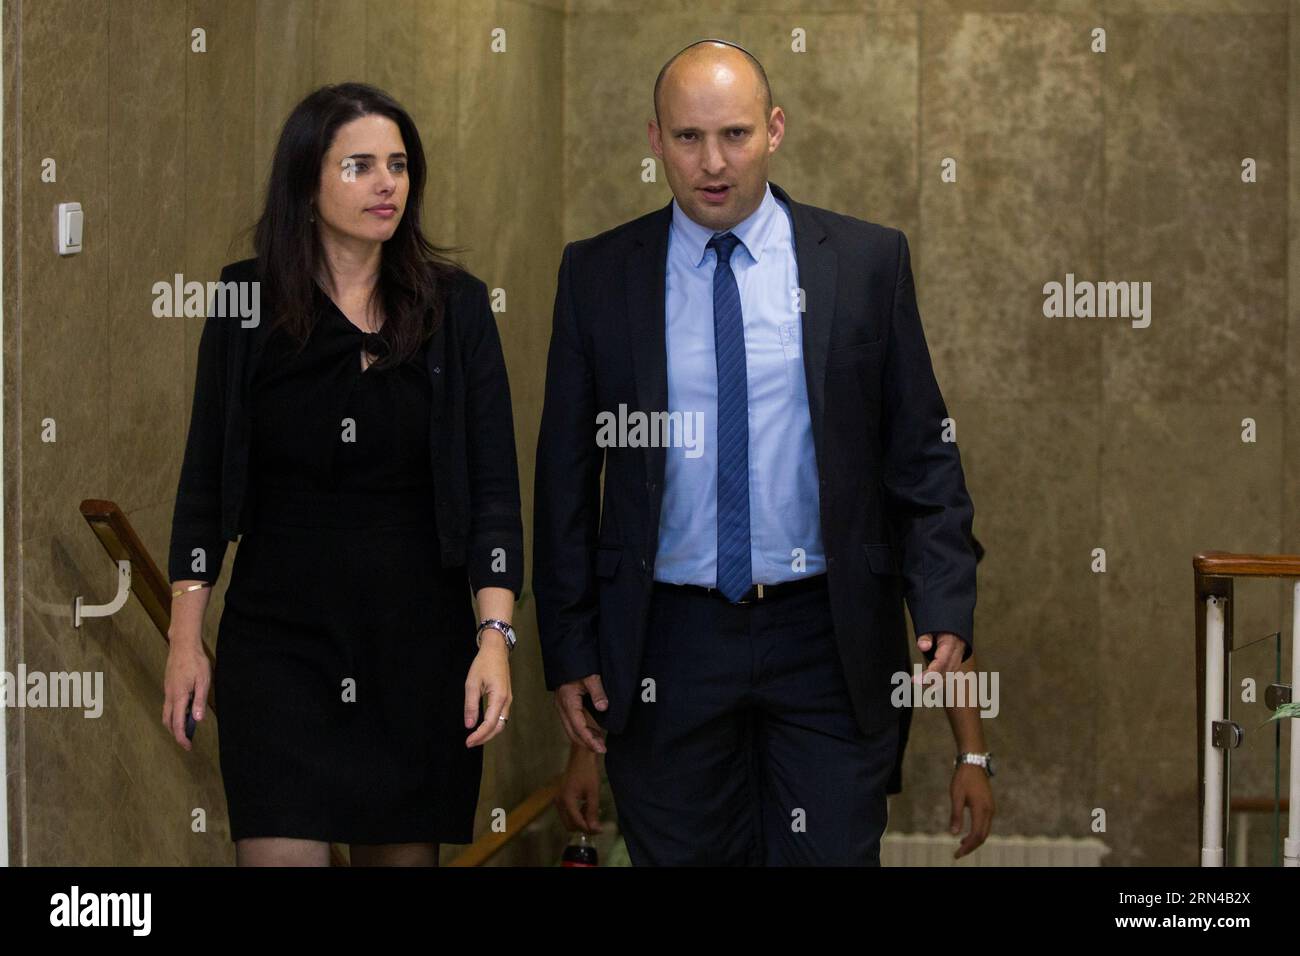 (150515) -- JERUSALEM, May 15, 2015 -- Incoming Israeli Justice Minister Ayelet Shaked (L) and incoming Israeli Education Minister Naftali Bennett arrive for the first cabinet meeting of the Israel s 34th government at the Prime Minister s office in Jerusalem, on May 15, 2015. Israeli Prime Minister Benjamin Netanyahu s right-wing new coalition government was sworn in late Thursday night, after the parliament approved it by a razor-thin 61-59 majority. /Yonatan Sindel) MIDEAST-JERUSALEM-ISRAEL-34TH GOV T-FIRST CABINET MEETING JINI PUBLICATIONxNOTxINxCHN   Jerusalem May 15 2015 Incoming Israeli Stock Photo